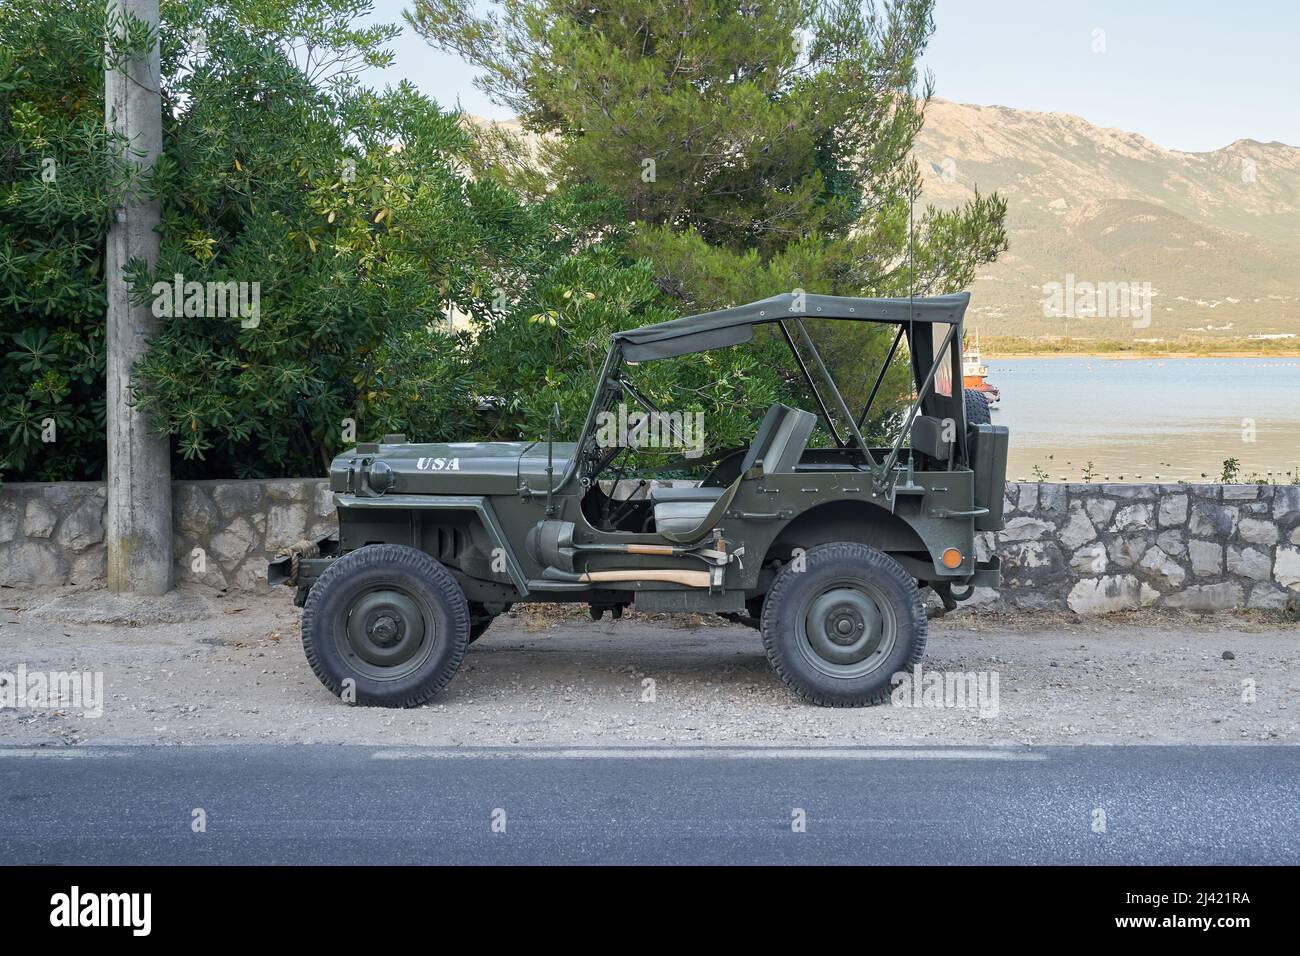 TIVAT, MONTENEGRO - JULY 16, 2021: Military retro Willys Jeep parked on the roadside Stock Photo